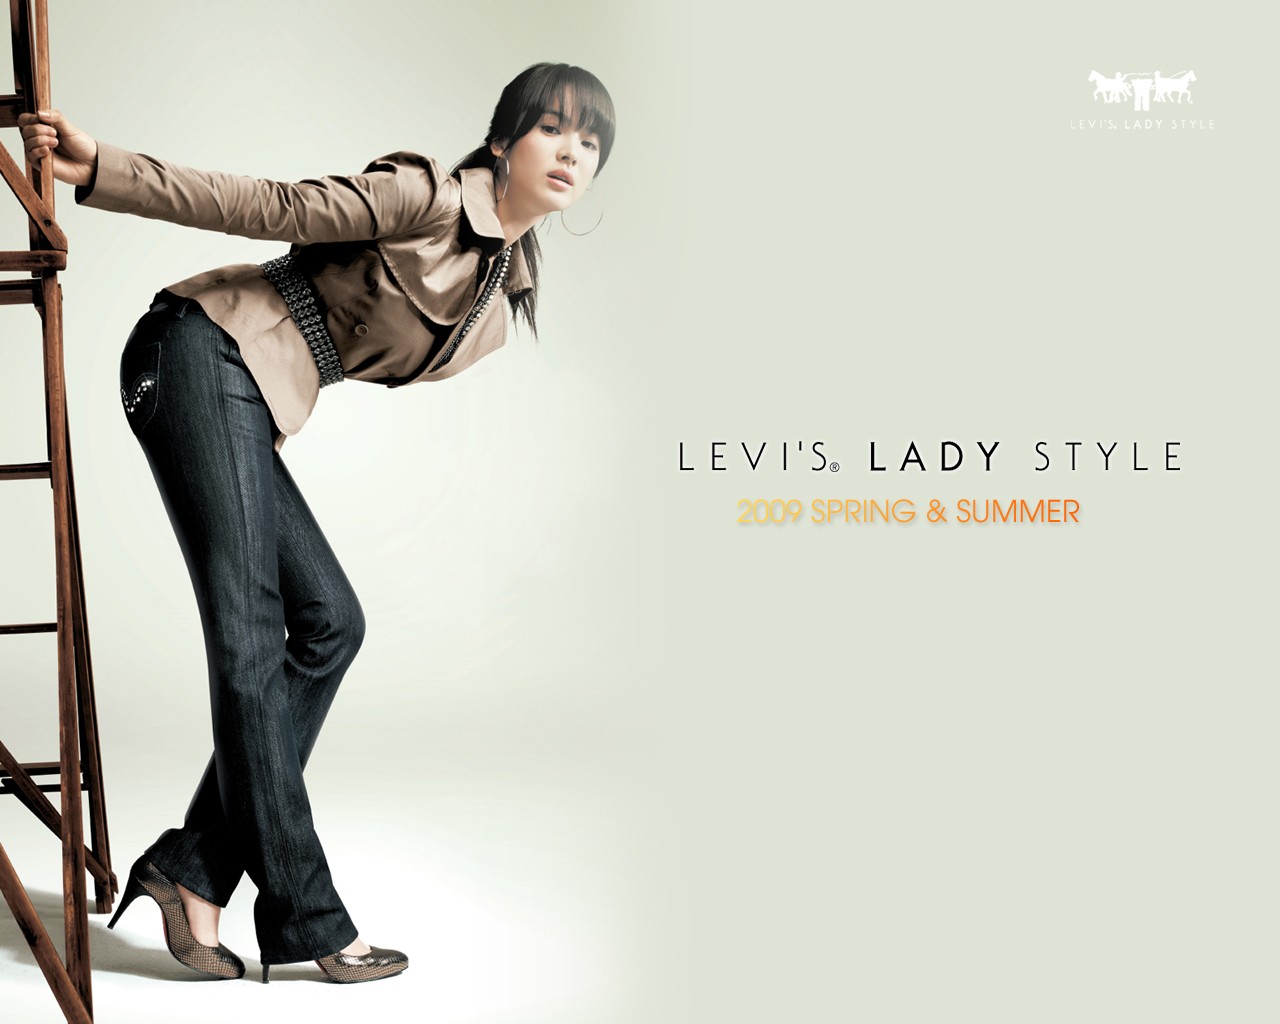 2009 Mujeres Levis Wallpapers #17 - 1280x1024